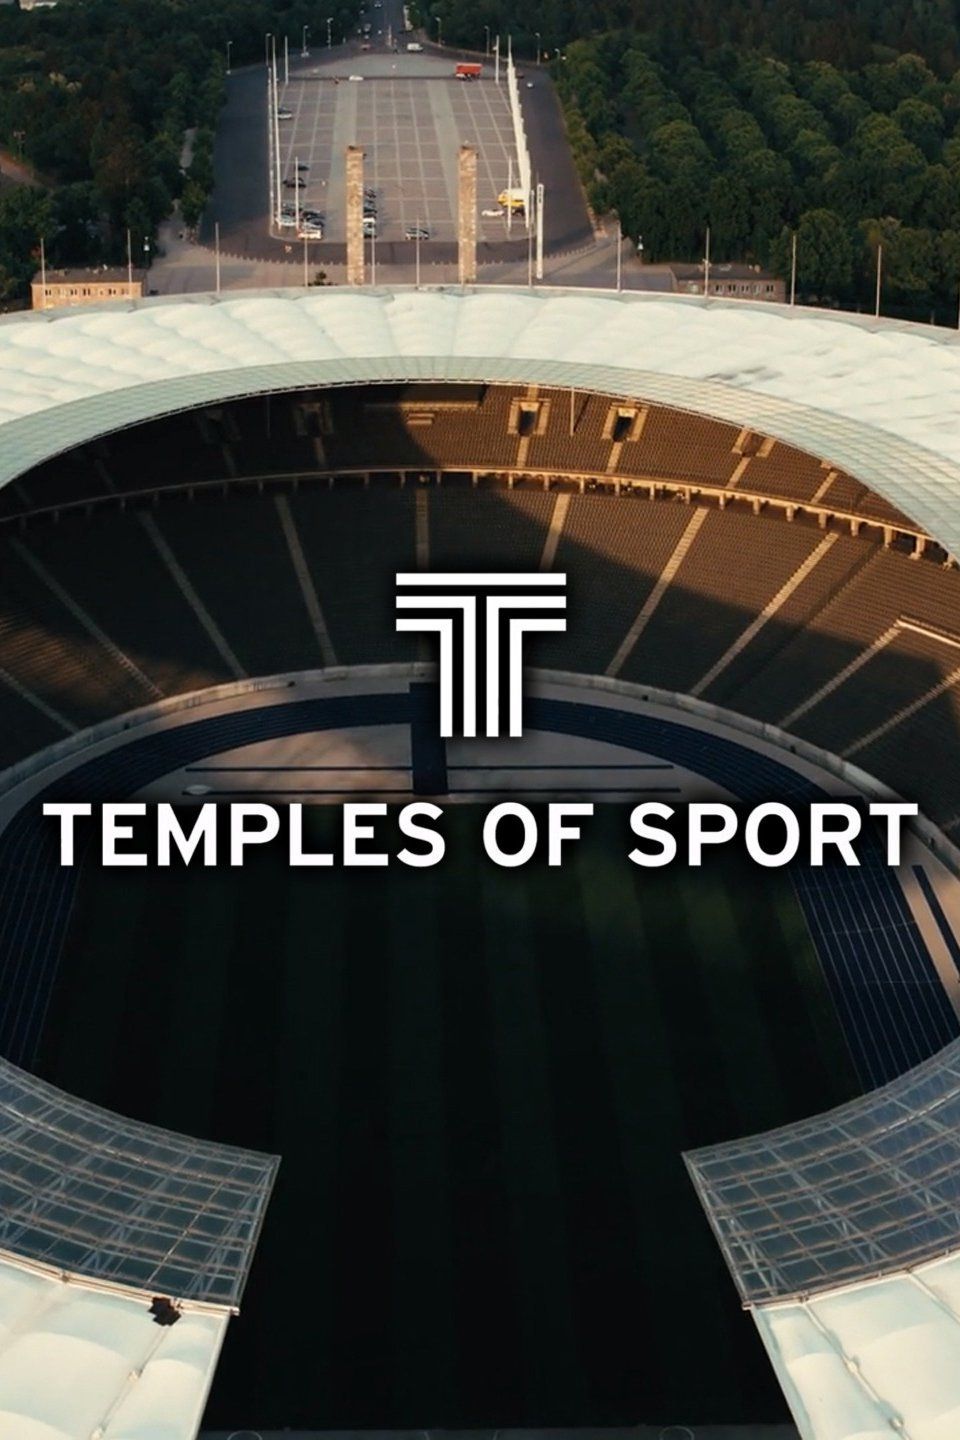 Temples of Sport